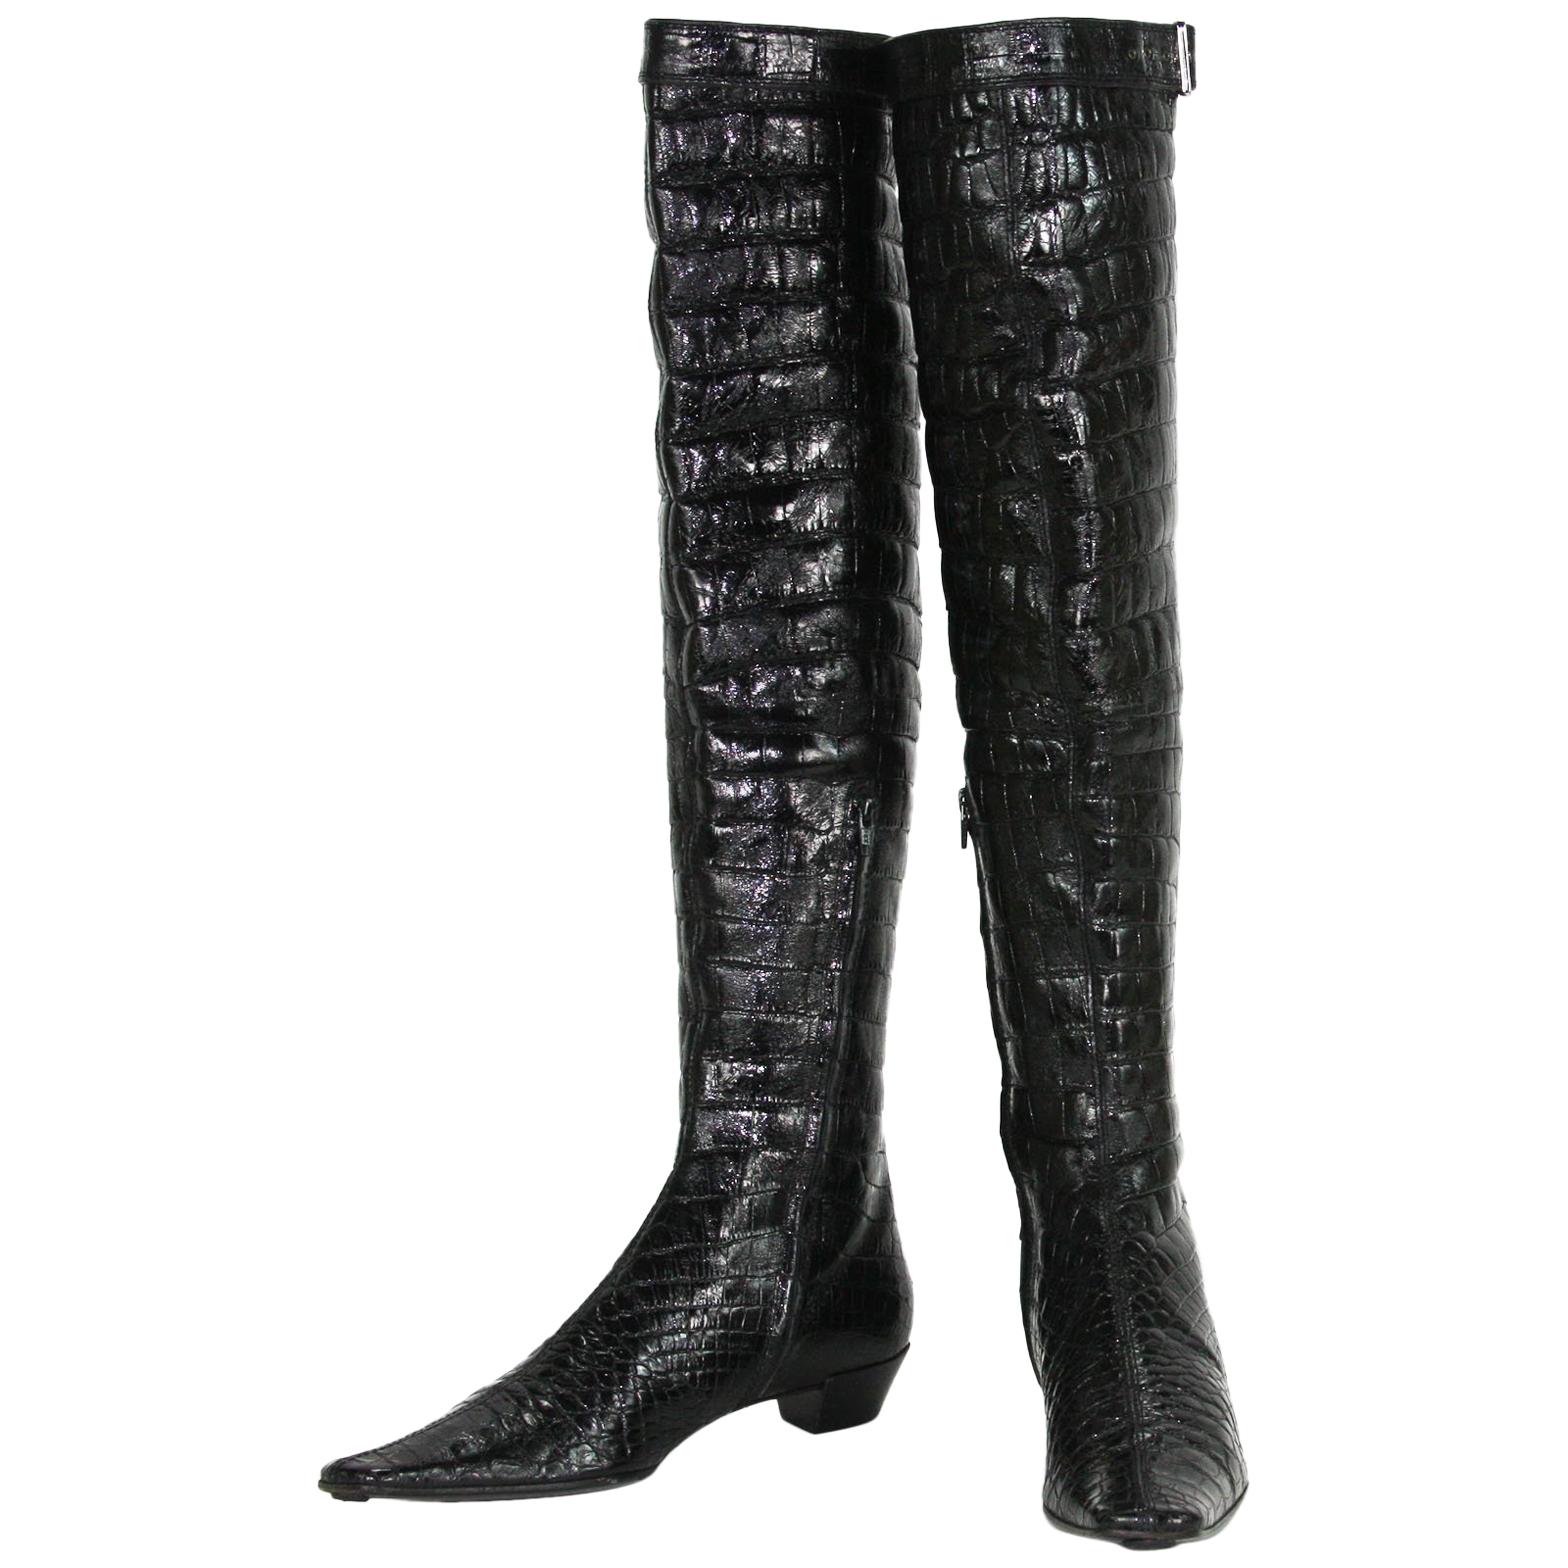 Tom Ford for Gucci F/W 2001 Alligator Soft & Shiny Skin Over Knee Black Boots 39